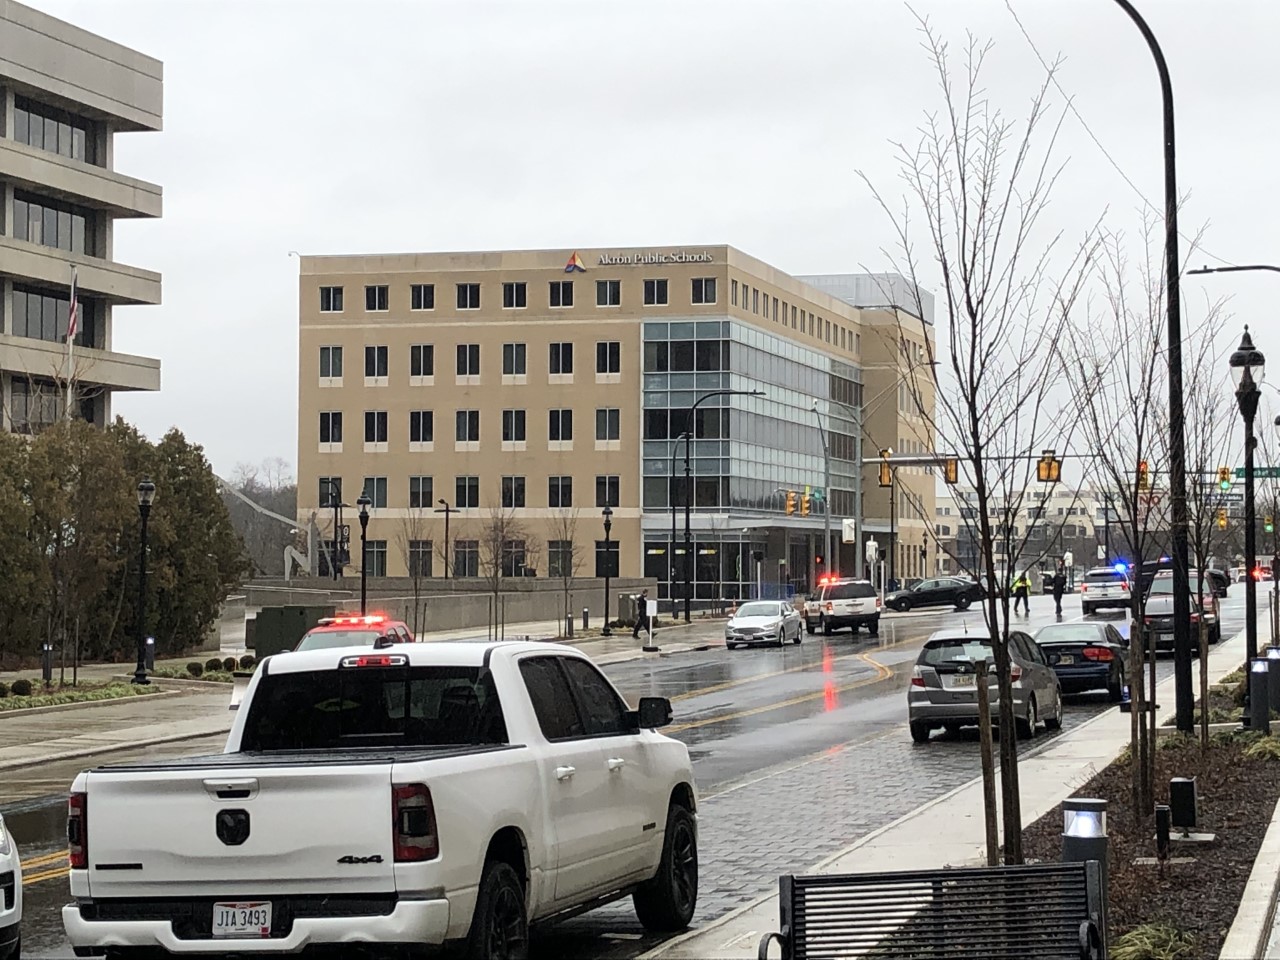  Akron bomb threat not credible, evacuees able to return to area: Authorities 